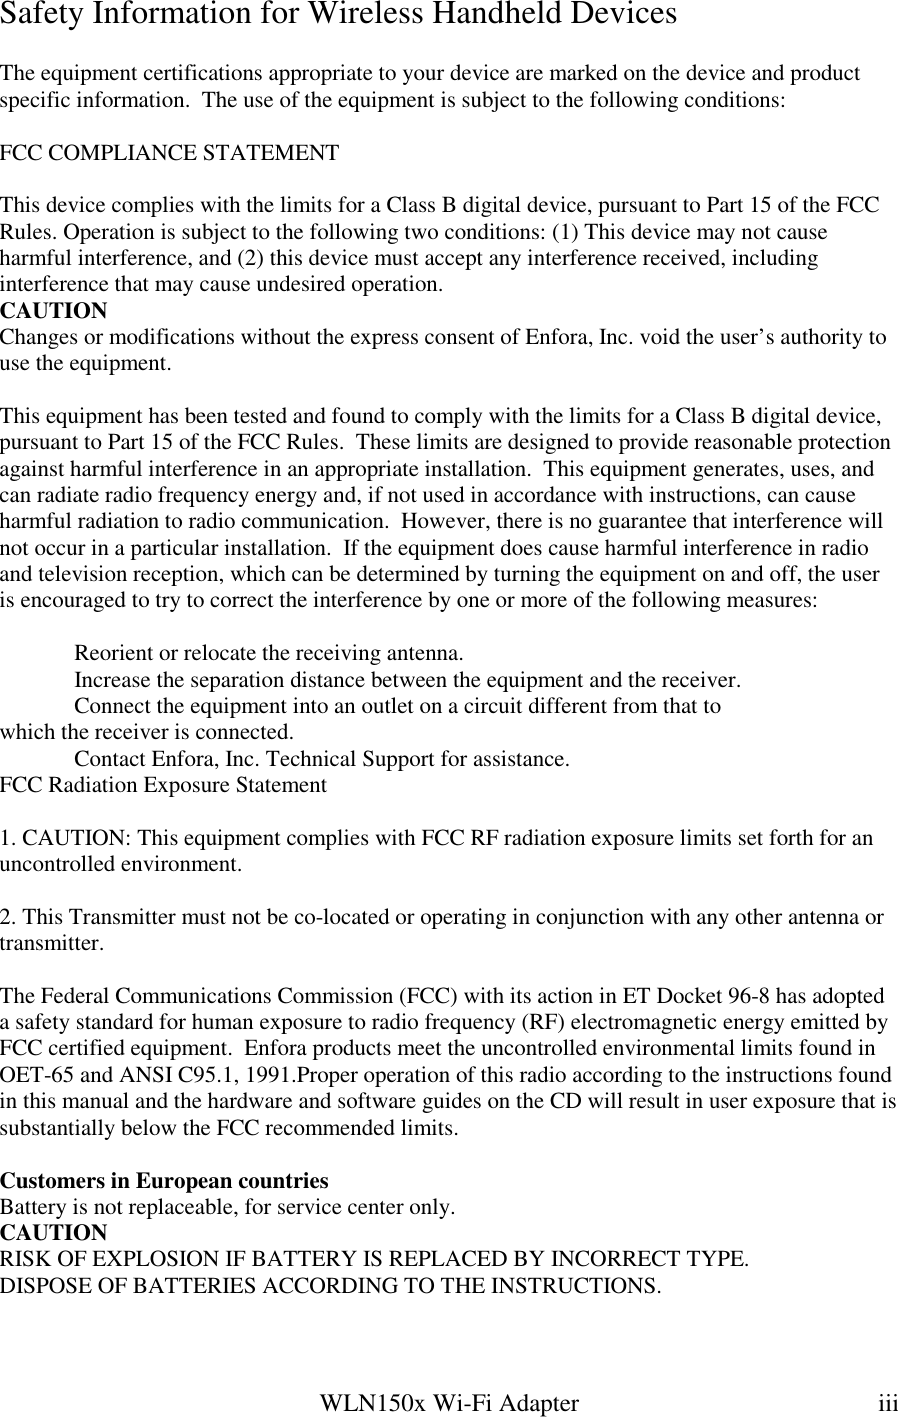   WLN150x Wi-Fi Adapter  iii Safety Information for Wireless Handheld Devices  The equipment certifications appropriate to your device are marked on the device and product specific information.  The use of the equipment is subject to the following conditions:  FCC COMPLIANCE STATEMENT  This device complies with the limits for a Class B digital device, pursuant to Part 15 of the FCC Rules. Operation is subject to the following two conditions: (1) This device may not cause harmful interference, and (2) this device must accept any interference received, including interference that may cause undesired operation. CAUTION Changes or modifications without the express consent of Enfora, Inc. void the user’s authority to use the equipment.  This equipment has been tested and found to comply with the limits for a Class B digital device, pursuant to Part 15 of the FCC Rules.  These limits are designed to provide reasonable protection against harmful interference in an appropriate installation.  This equipment generates, uses, and can radiate radio frequency energy and, if not used in accordance with instructions, can cause harmful radiation to radio communication.  However, there is no guarantee that interference will not occur in a particular installation.  If the equipment does cause harmful interference in radio and television reception, which can be determined by turning the equipment on and off, the user is encouraged to try to correct the interference by one or more of the following measures:    Reorient or relocate the receiving antenna.   Increase the separation distance between the equipment and the receiver.   Connect the equipment into an outlet on a circuit different from that to   which the receiver is connected.   Contact Enfora, Inc. Technical Support for assistance. FCC Radiation Exposure Statement  1. CAUTION: This equipment complies with FCC RF radiation exposure limits set forth for an uncontrolled environment.  2. This Transmitter must not be co-located or operating in conjunction with any other antenna or transmitter.  The Federal Communications Commission (FCC) with its action in ET Docket 96-8 has adopted a safety standard for human exposure to radio frequency (RF) electromagnetic energy emitted by FCC certified equipment.  Enfora products meet the uncontrolled environmental limits found in OET-65 and ANSI C95.1, 1991.Proper operation of this radio according to the instructions found in this manual and the hardware and software guides on the CD will result in user exposure that is substantially below the FCC recommended limits.  Customers in European countries Battery is not replaceable, for service center only. CAUTION RISK OF EXPLOSION IF BATTERY IS REPLACED BY INCORRECT TYPE. DISPOSE OF BATTERIES ACCORDING TO THE INSTRUCTIONS.  